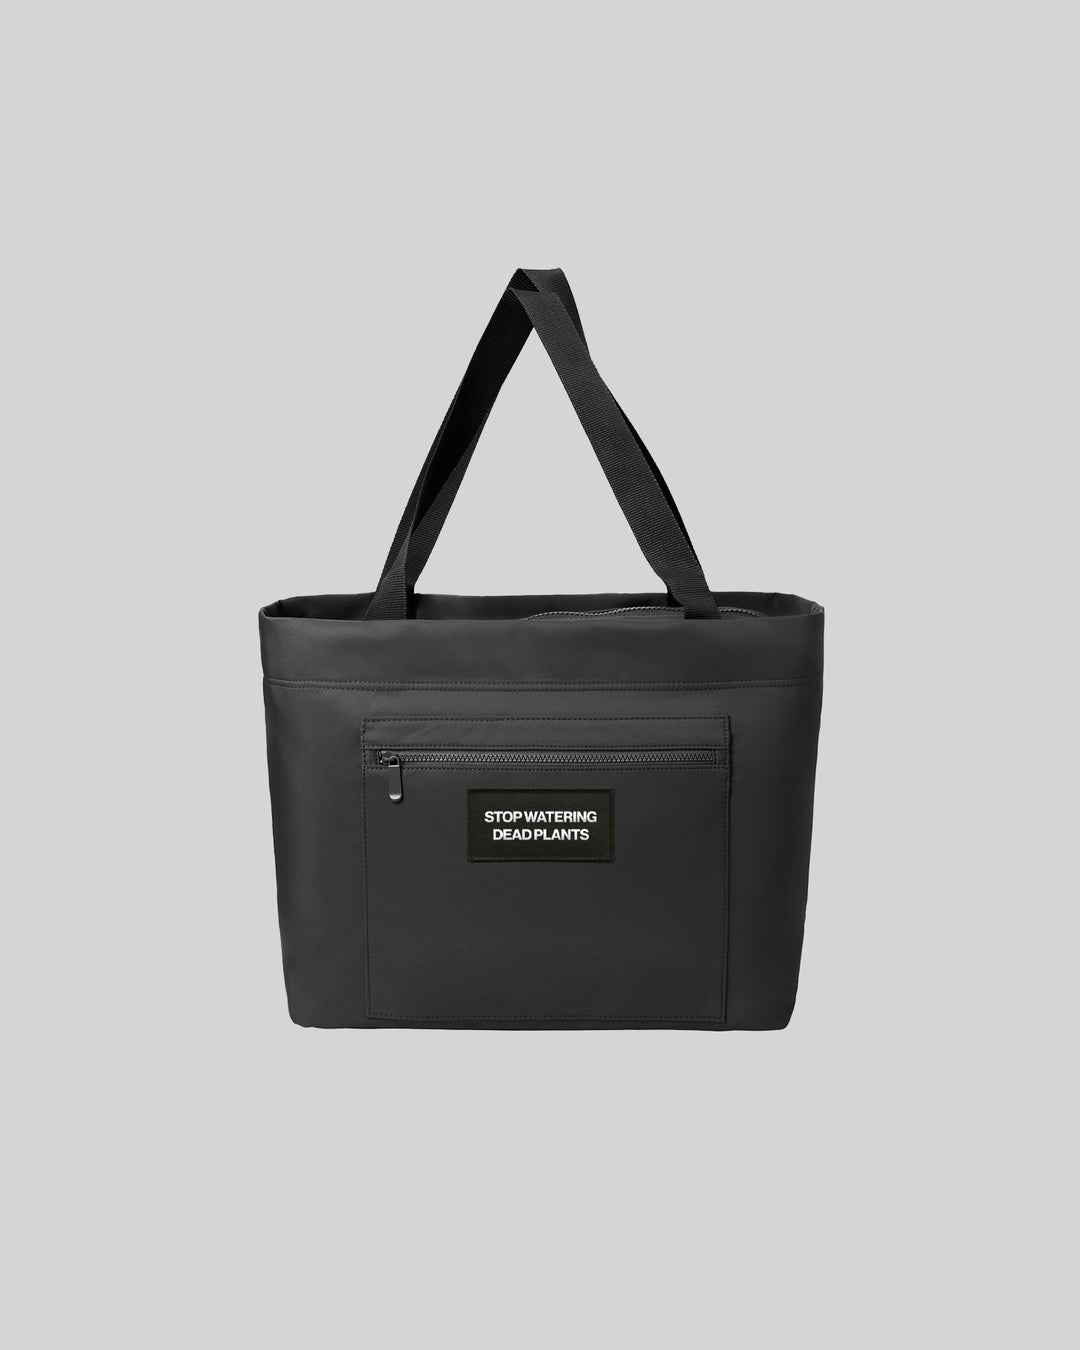 Stop Watering Dead Plants 2.0 Matte Carryall Tote - trainofthoughtcollective